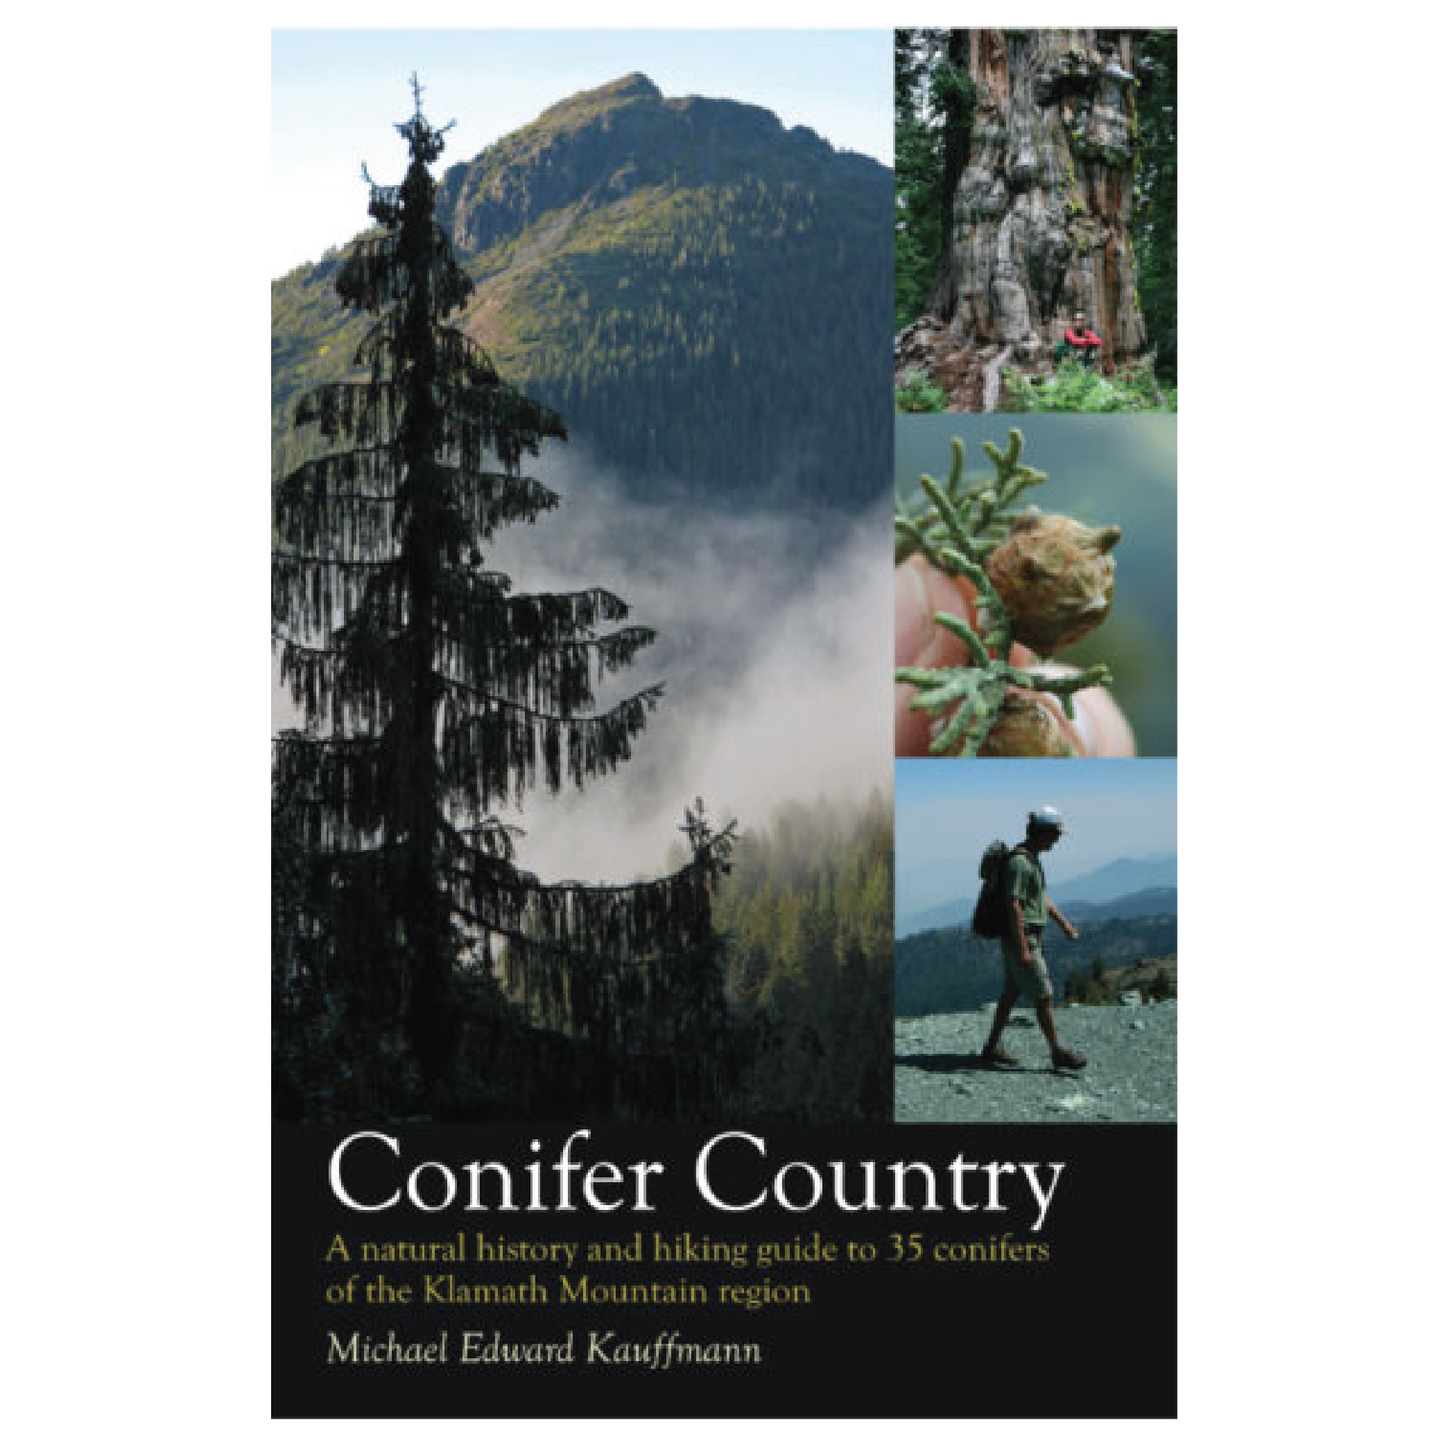 Conifer Country